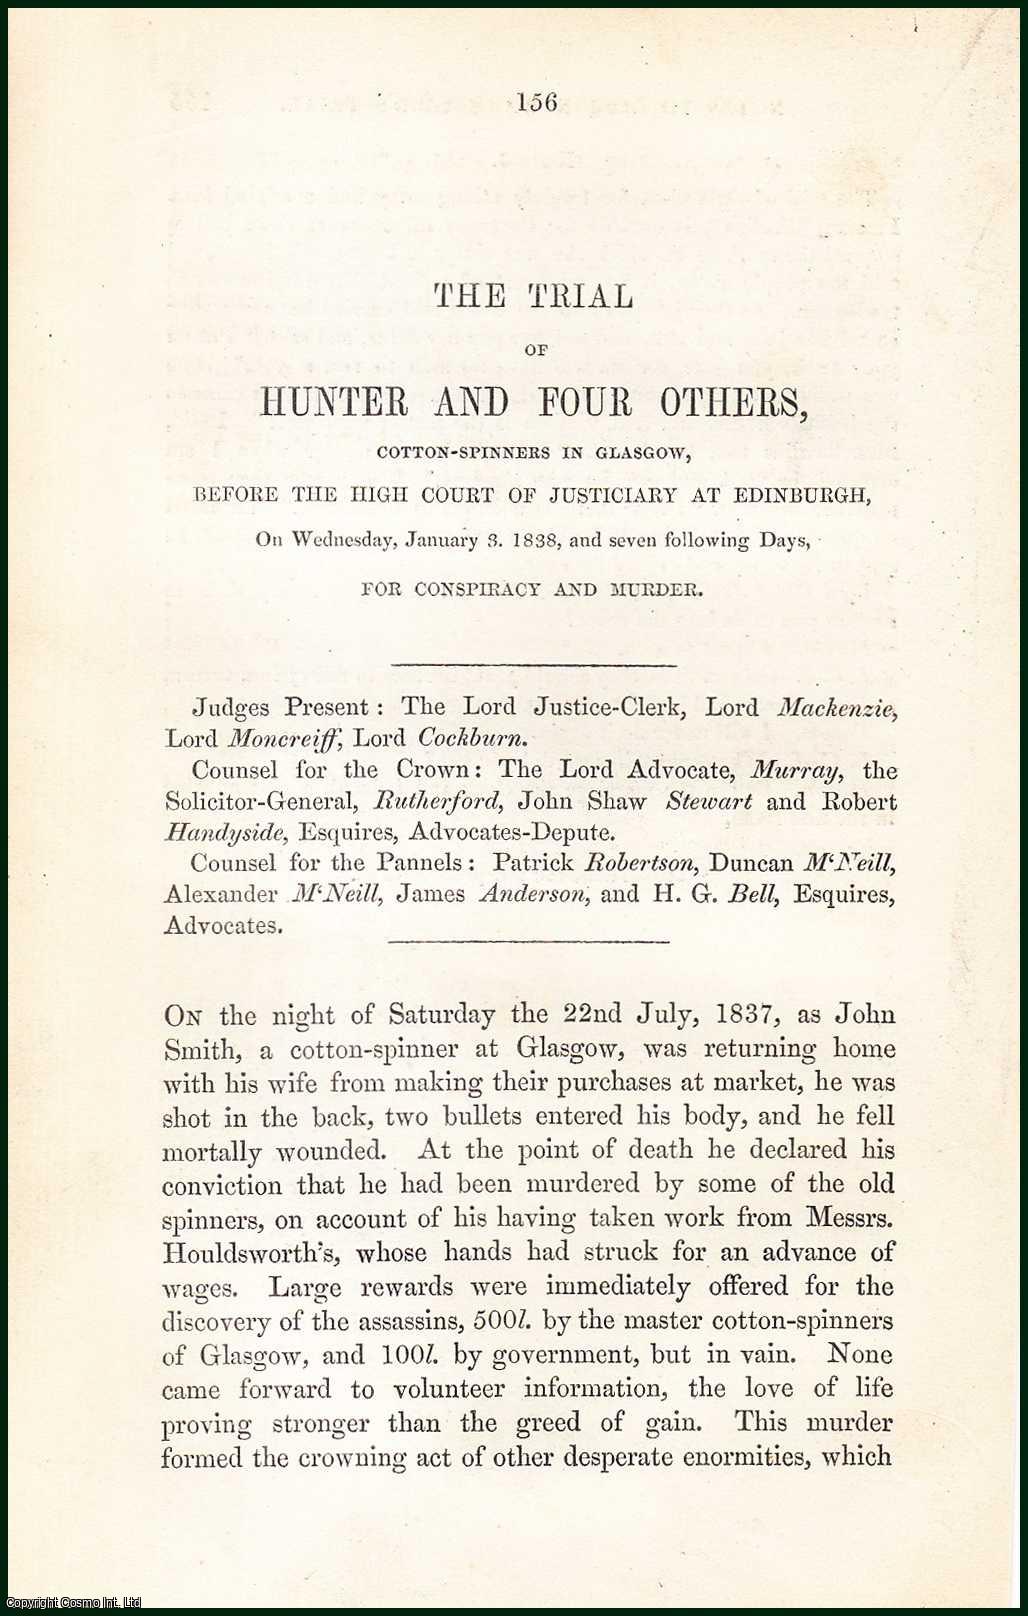 [Trial] - The Trial of Hunter & Four Others, Cotton-Spinners in Glasgow, Before The High Court of Justiciary at Edinburgh for Conspiracy & Murder, 1838. An uncommon original article from the Collected State Trials, 1850.